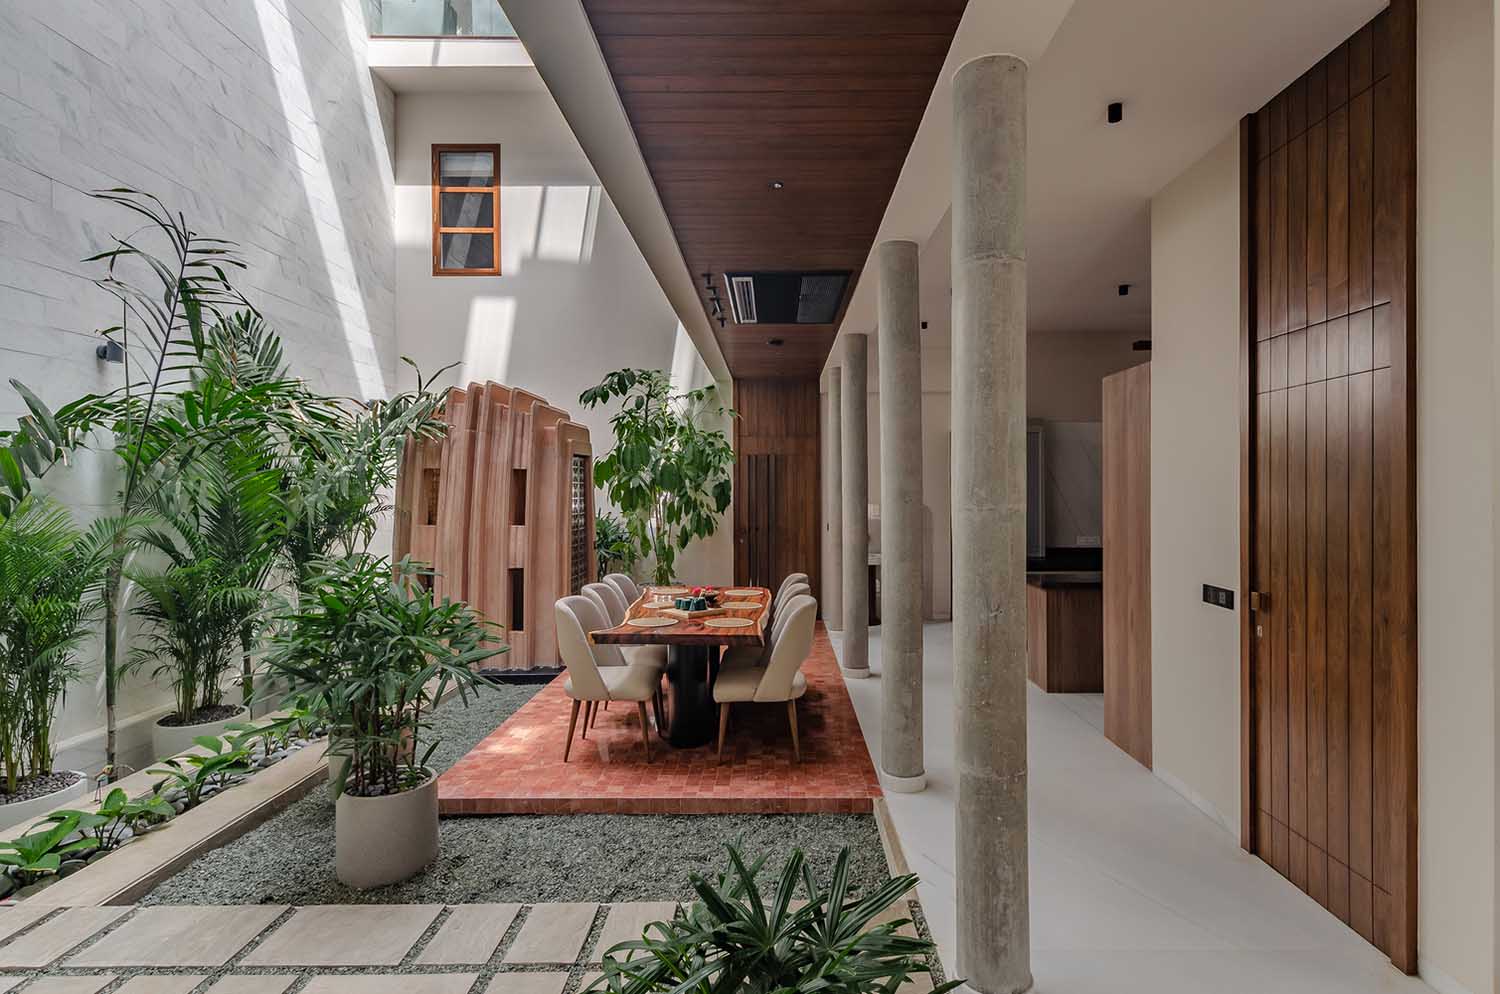 The Breathing House doesn't allow for claustrophobic feelings with its open courtyard. Image by Ar. Pratik Chandresha